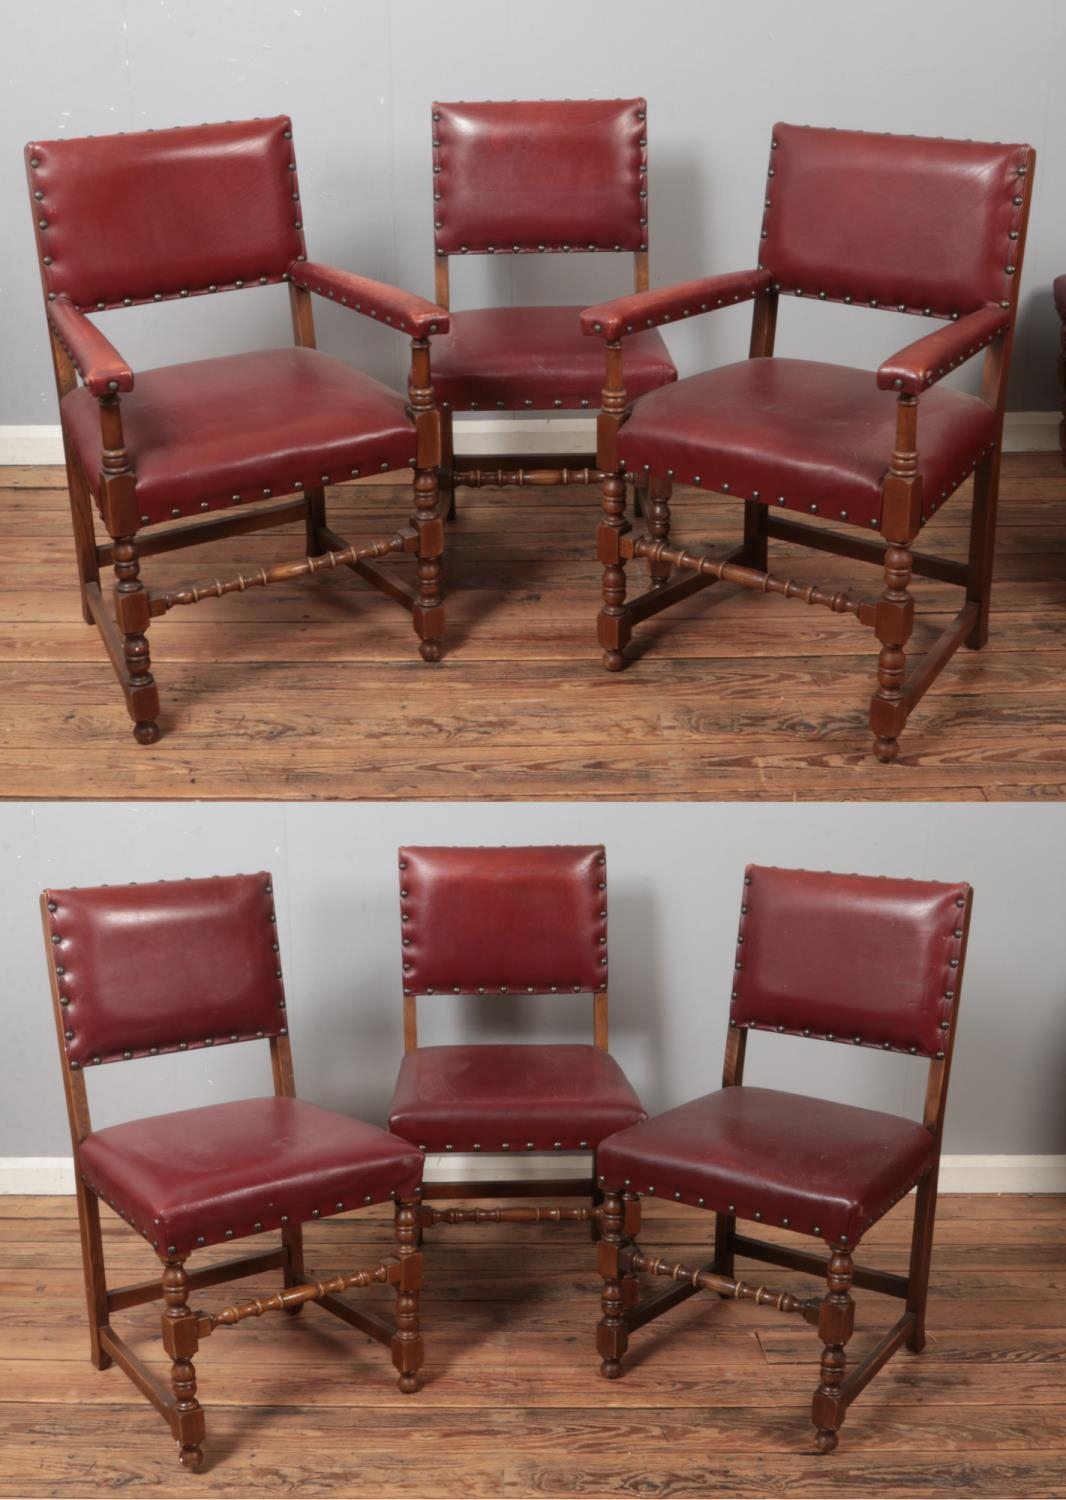 A set of six oak and red leather dining chairs. Includes two carvers.